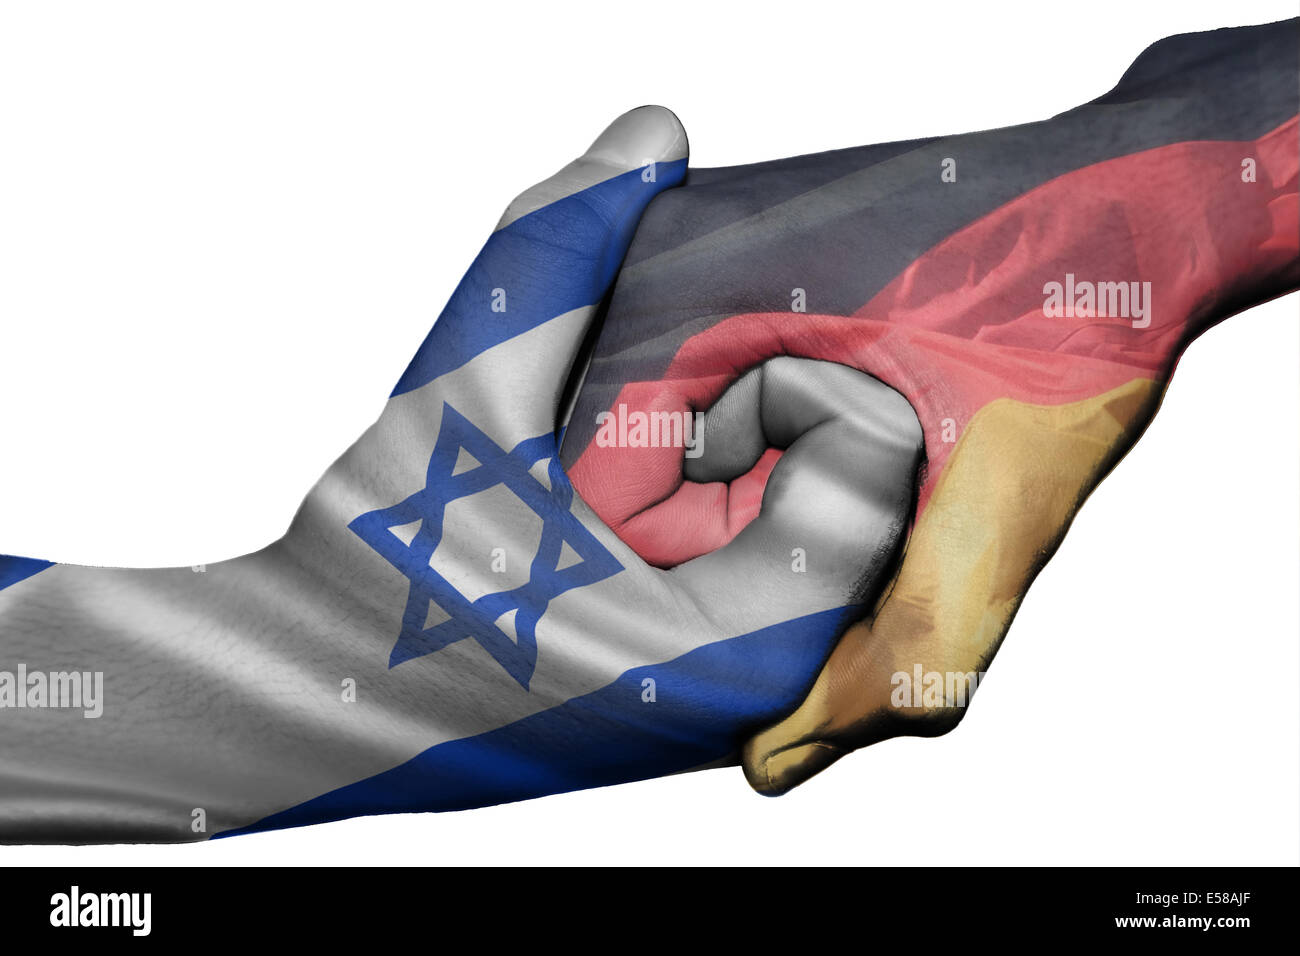 Diplomatic handshake between countries: flags of Israel and Germany overprinted the two hands Stock Photo